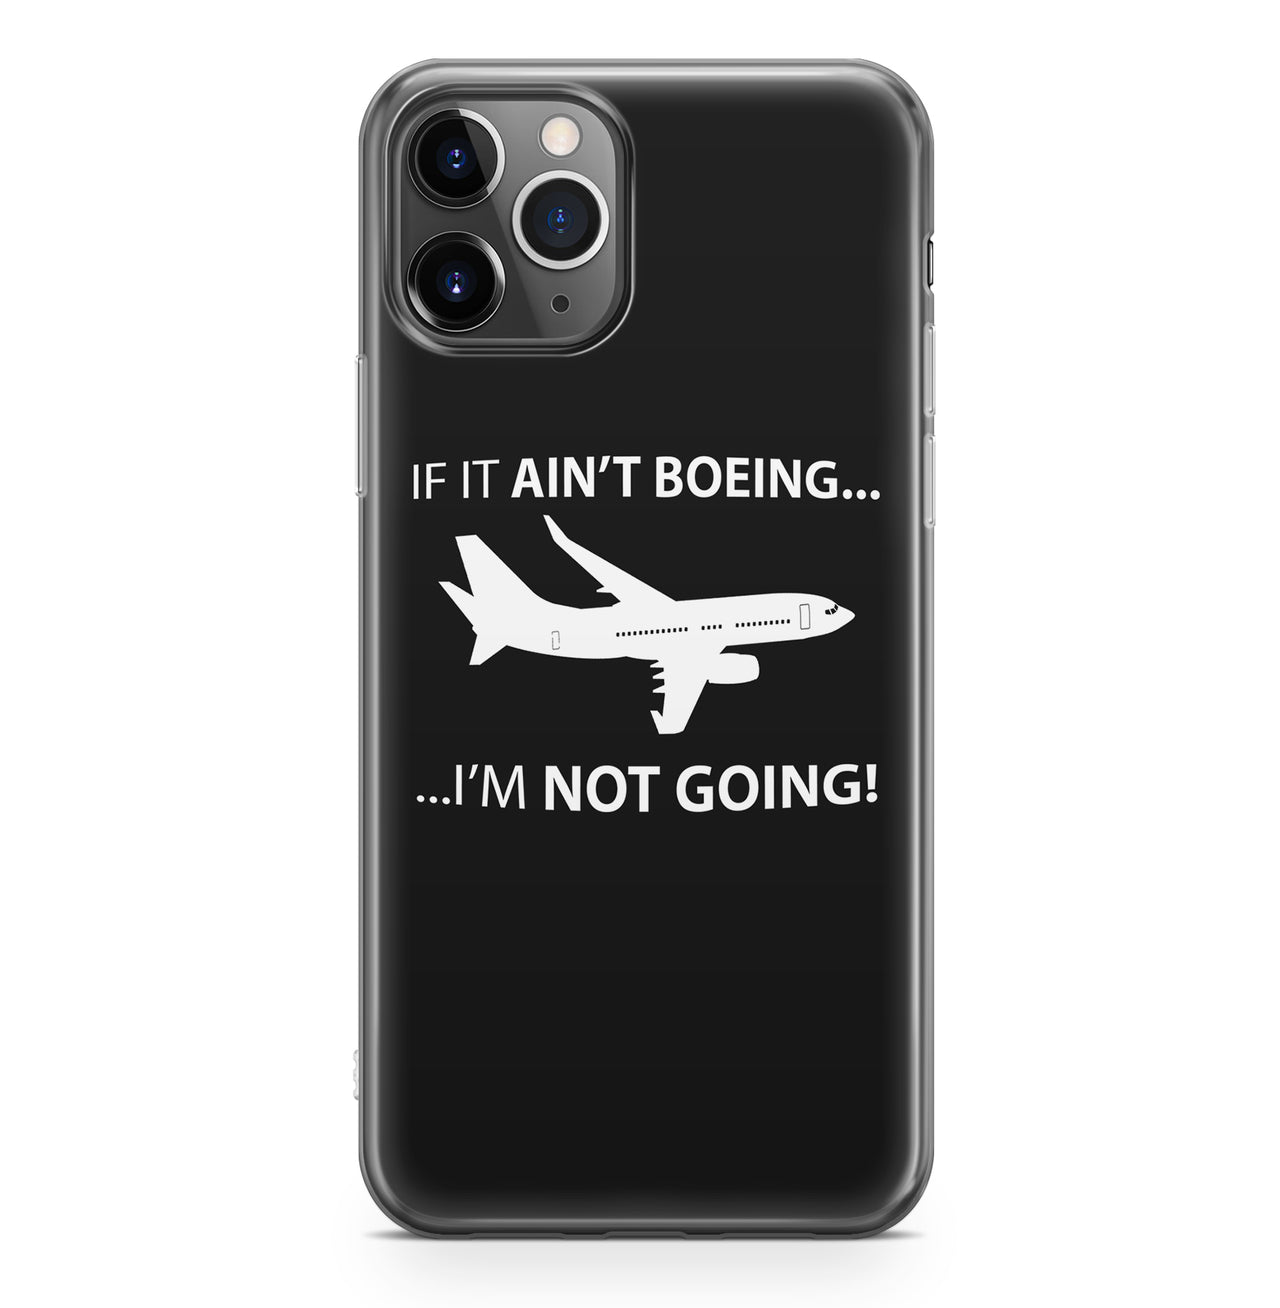 If It Ain't Boeing I'm Not Going! Designed iPhone Cases